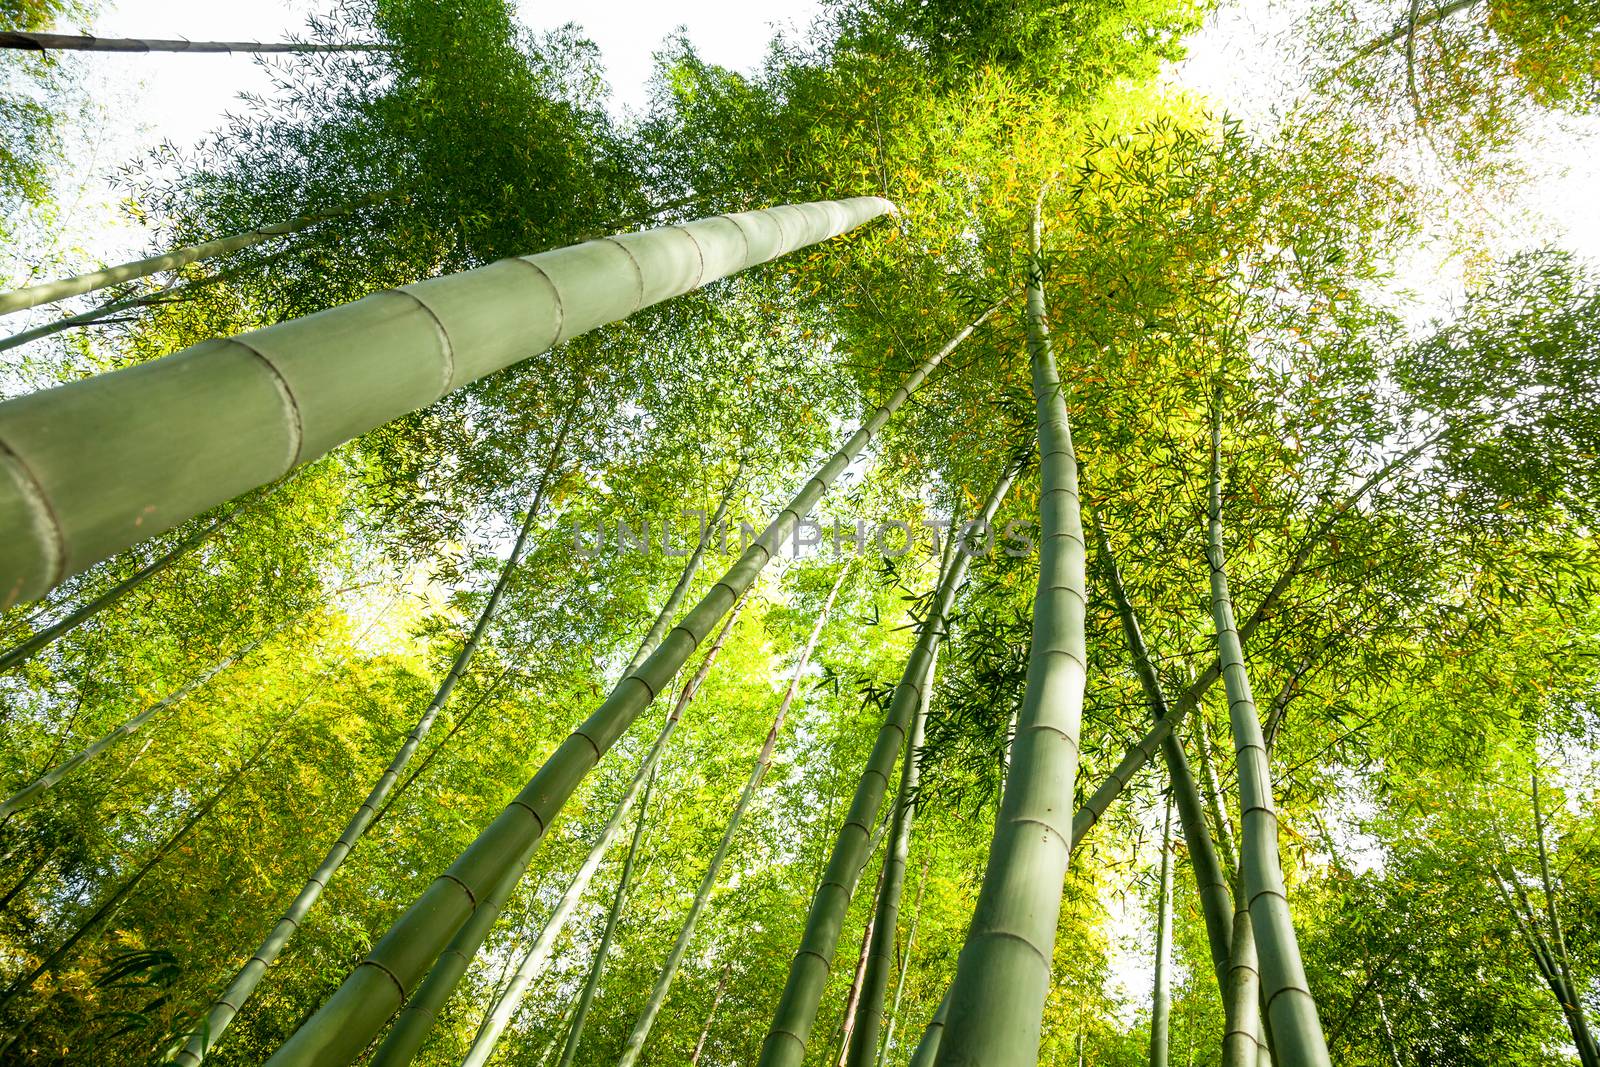 Green bamboo trees natural background